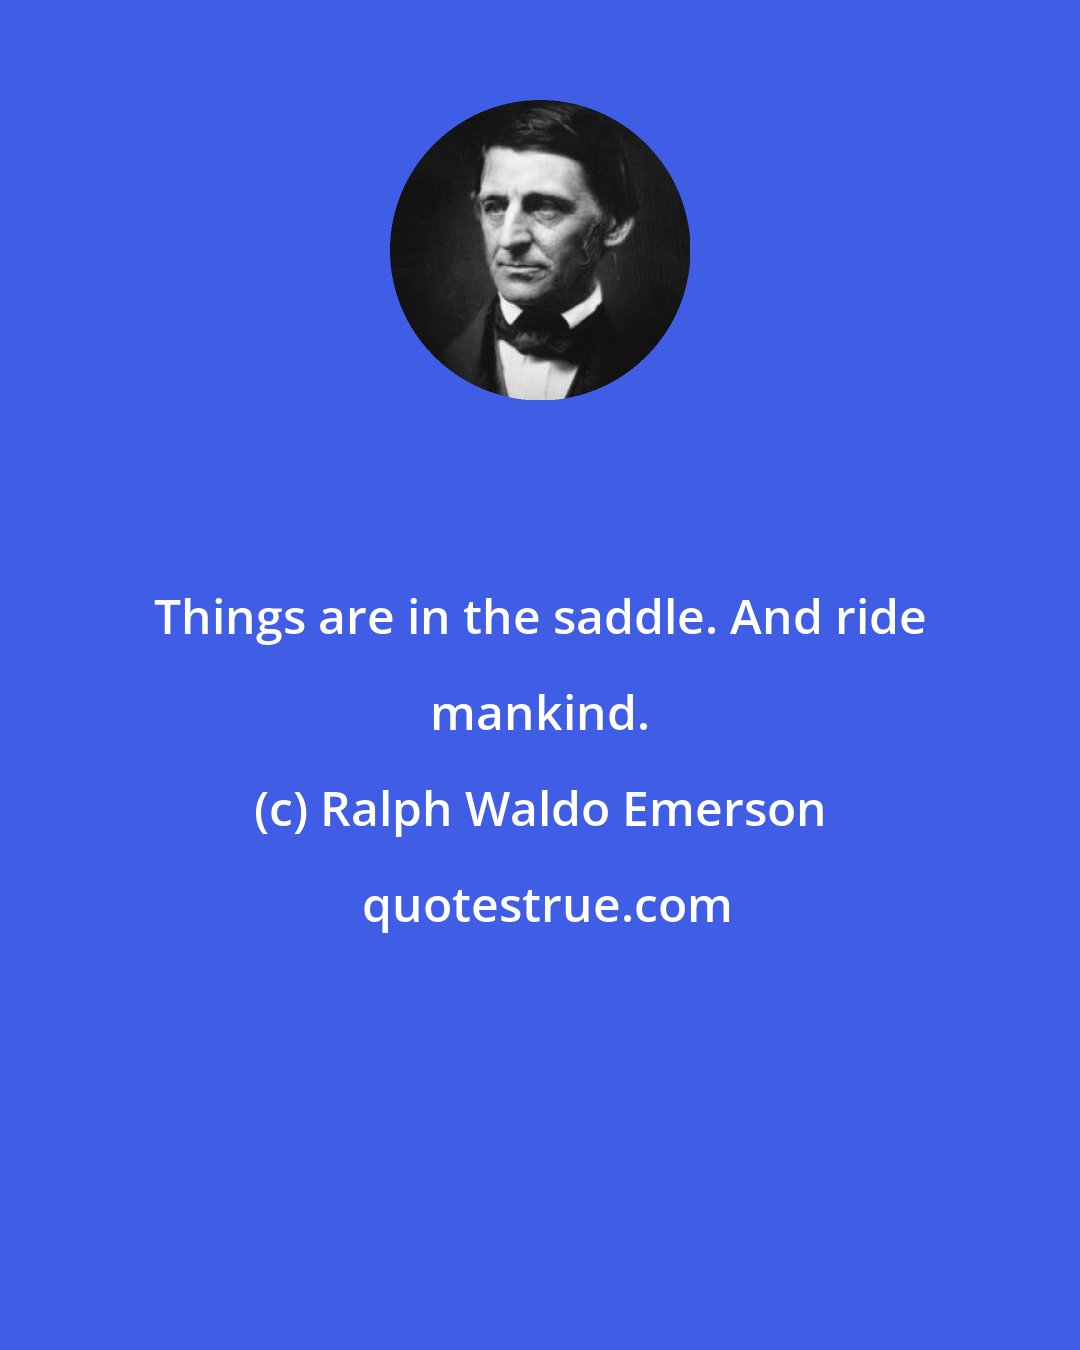 Ralph Waldo Emerson: Things are in the saddle. And ride mankind.